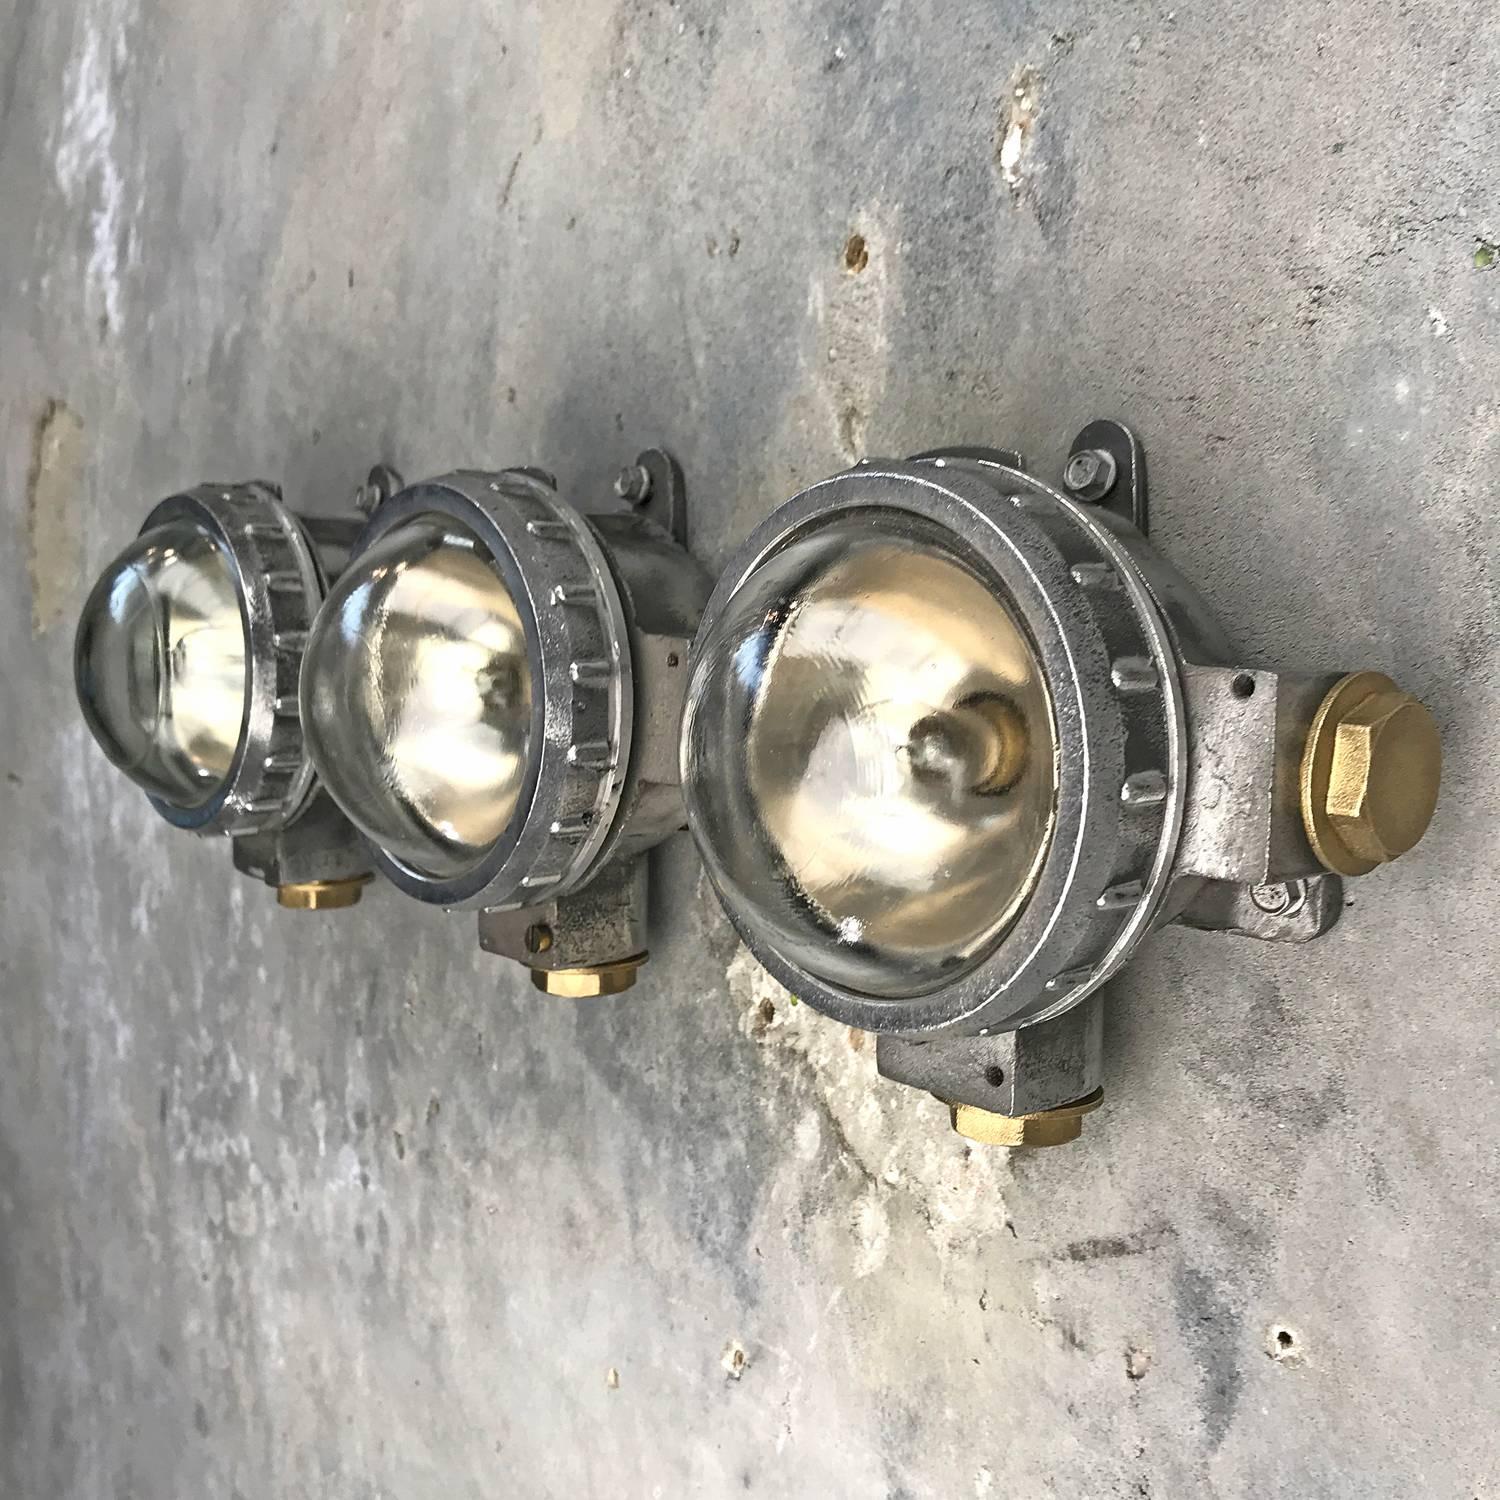 Reclaimed from Russian Cargo ships built during the 1970s these micro spot lights are a very versatile lighting solution for domestic and commercial environments.

They work extremely well as feature wall lights where space may be limited, foot